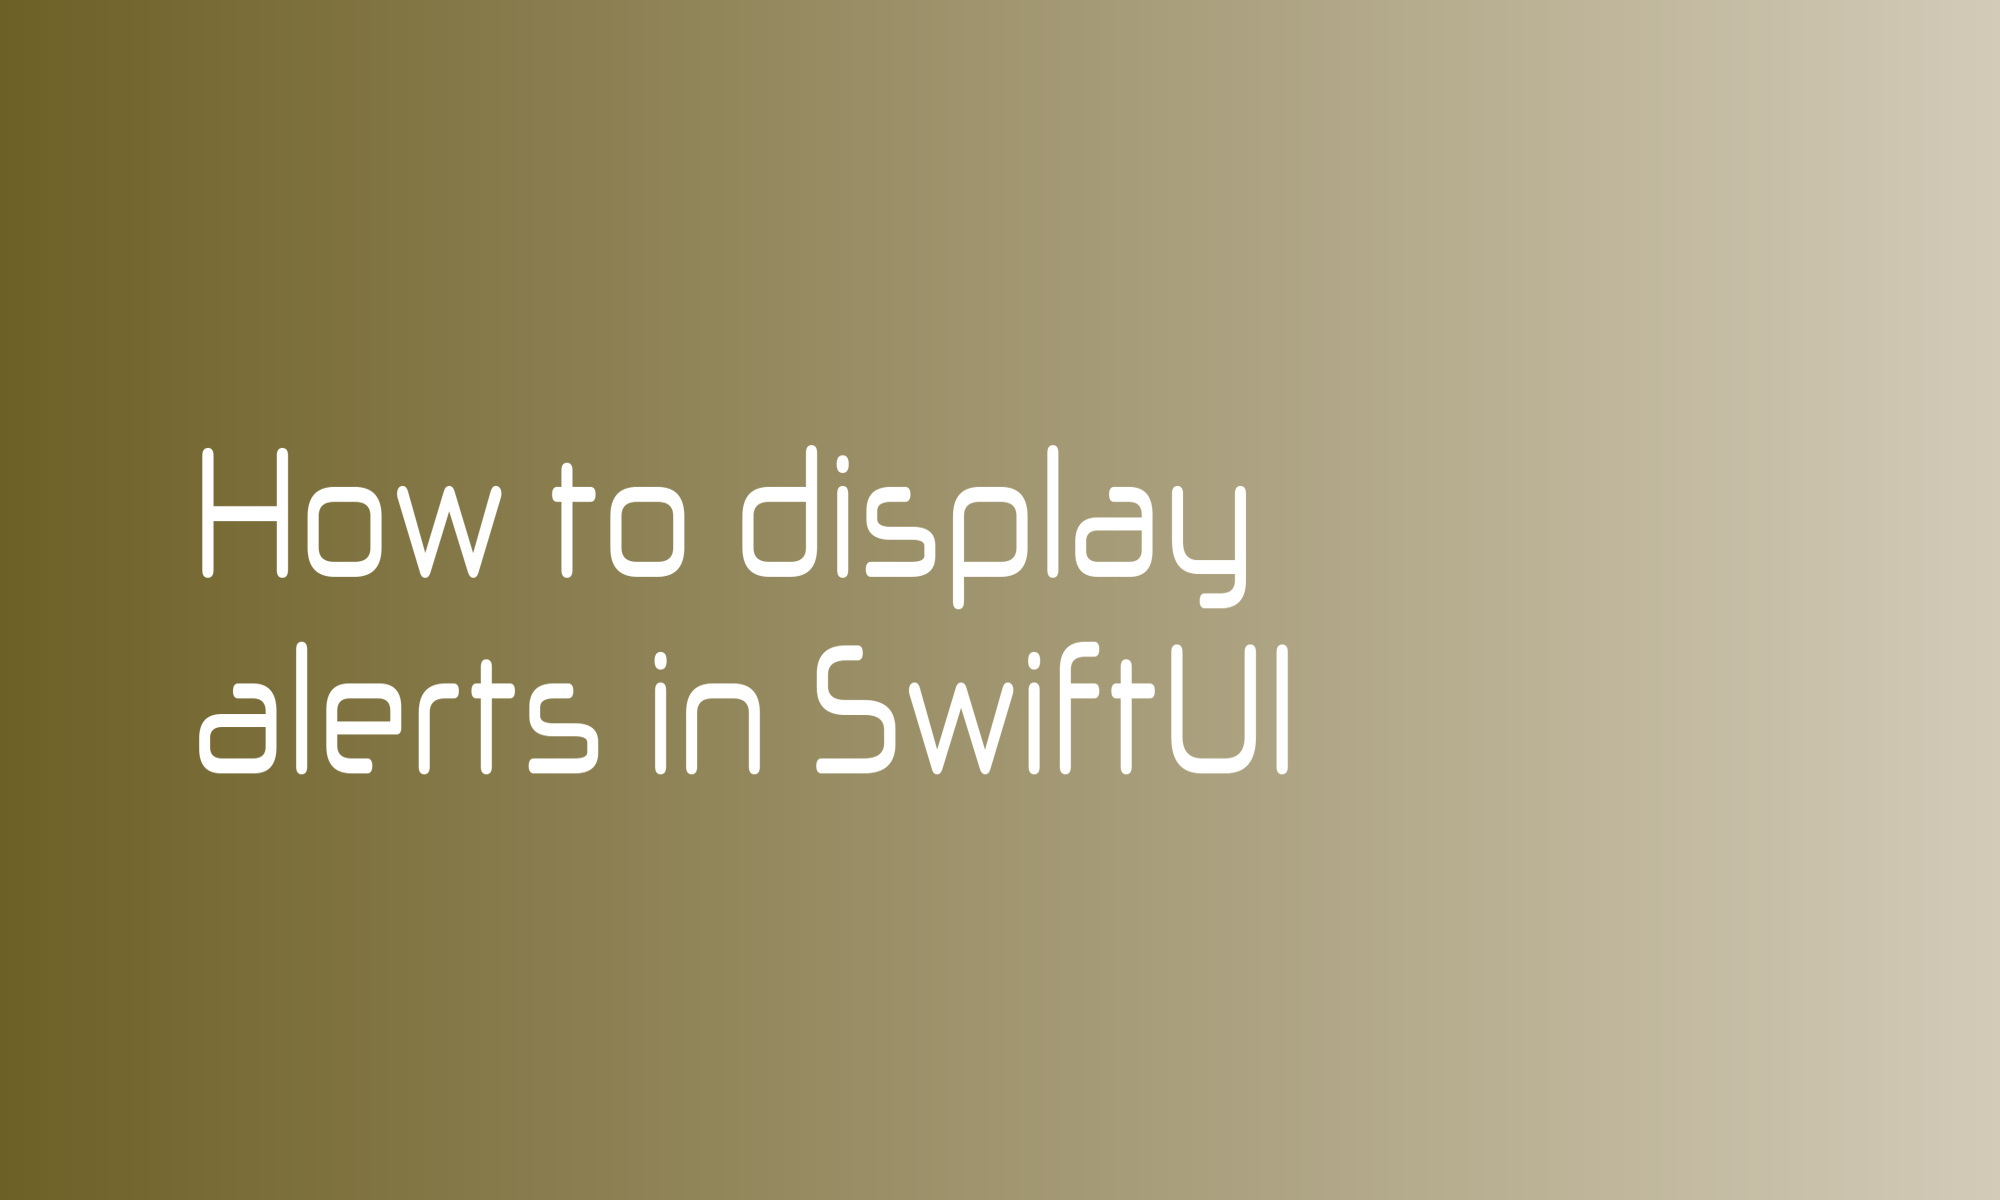 How to display alerts in SwiftUI